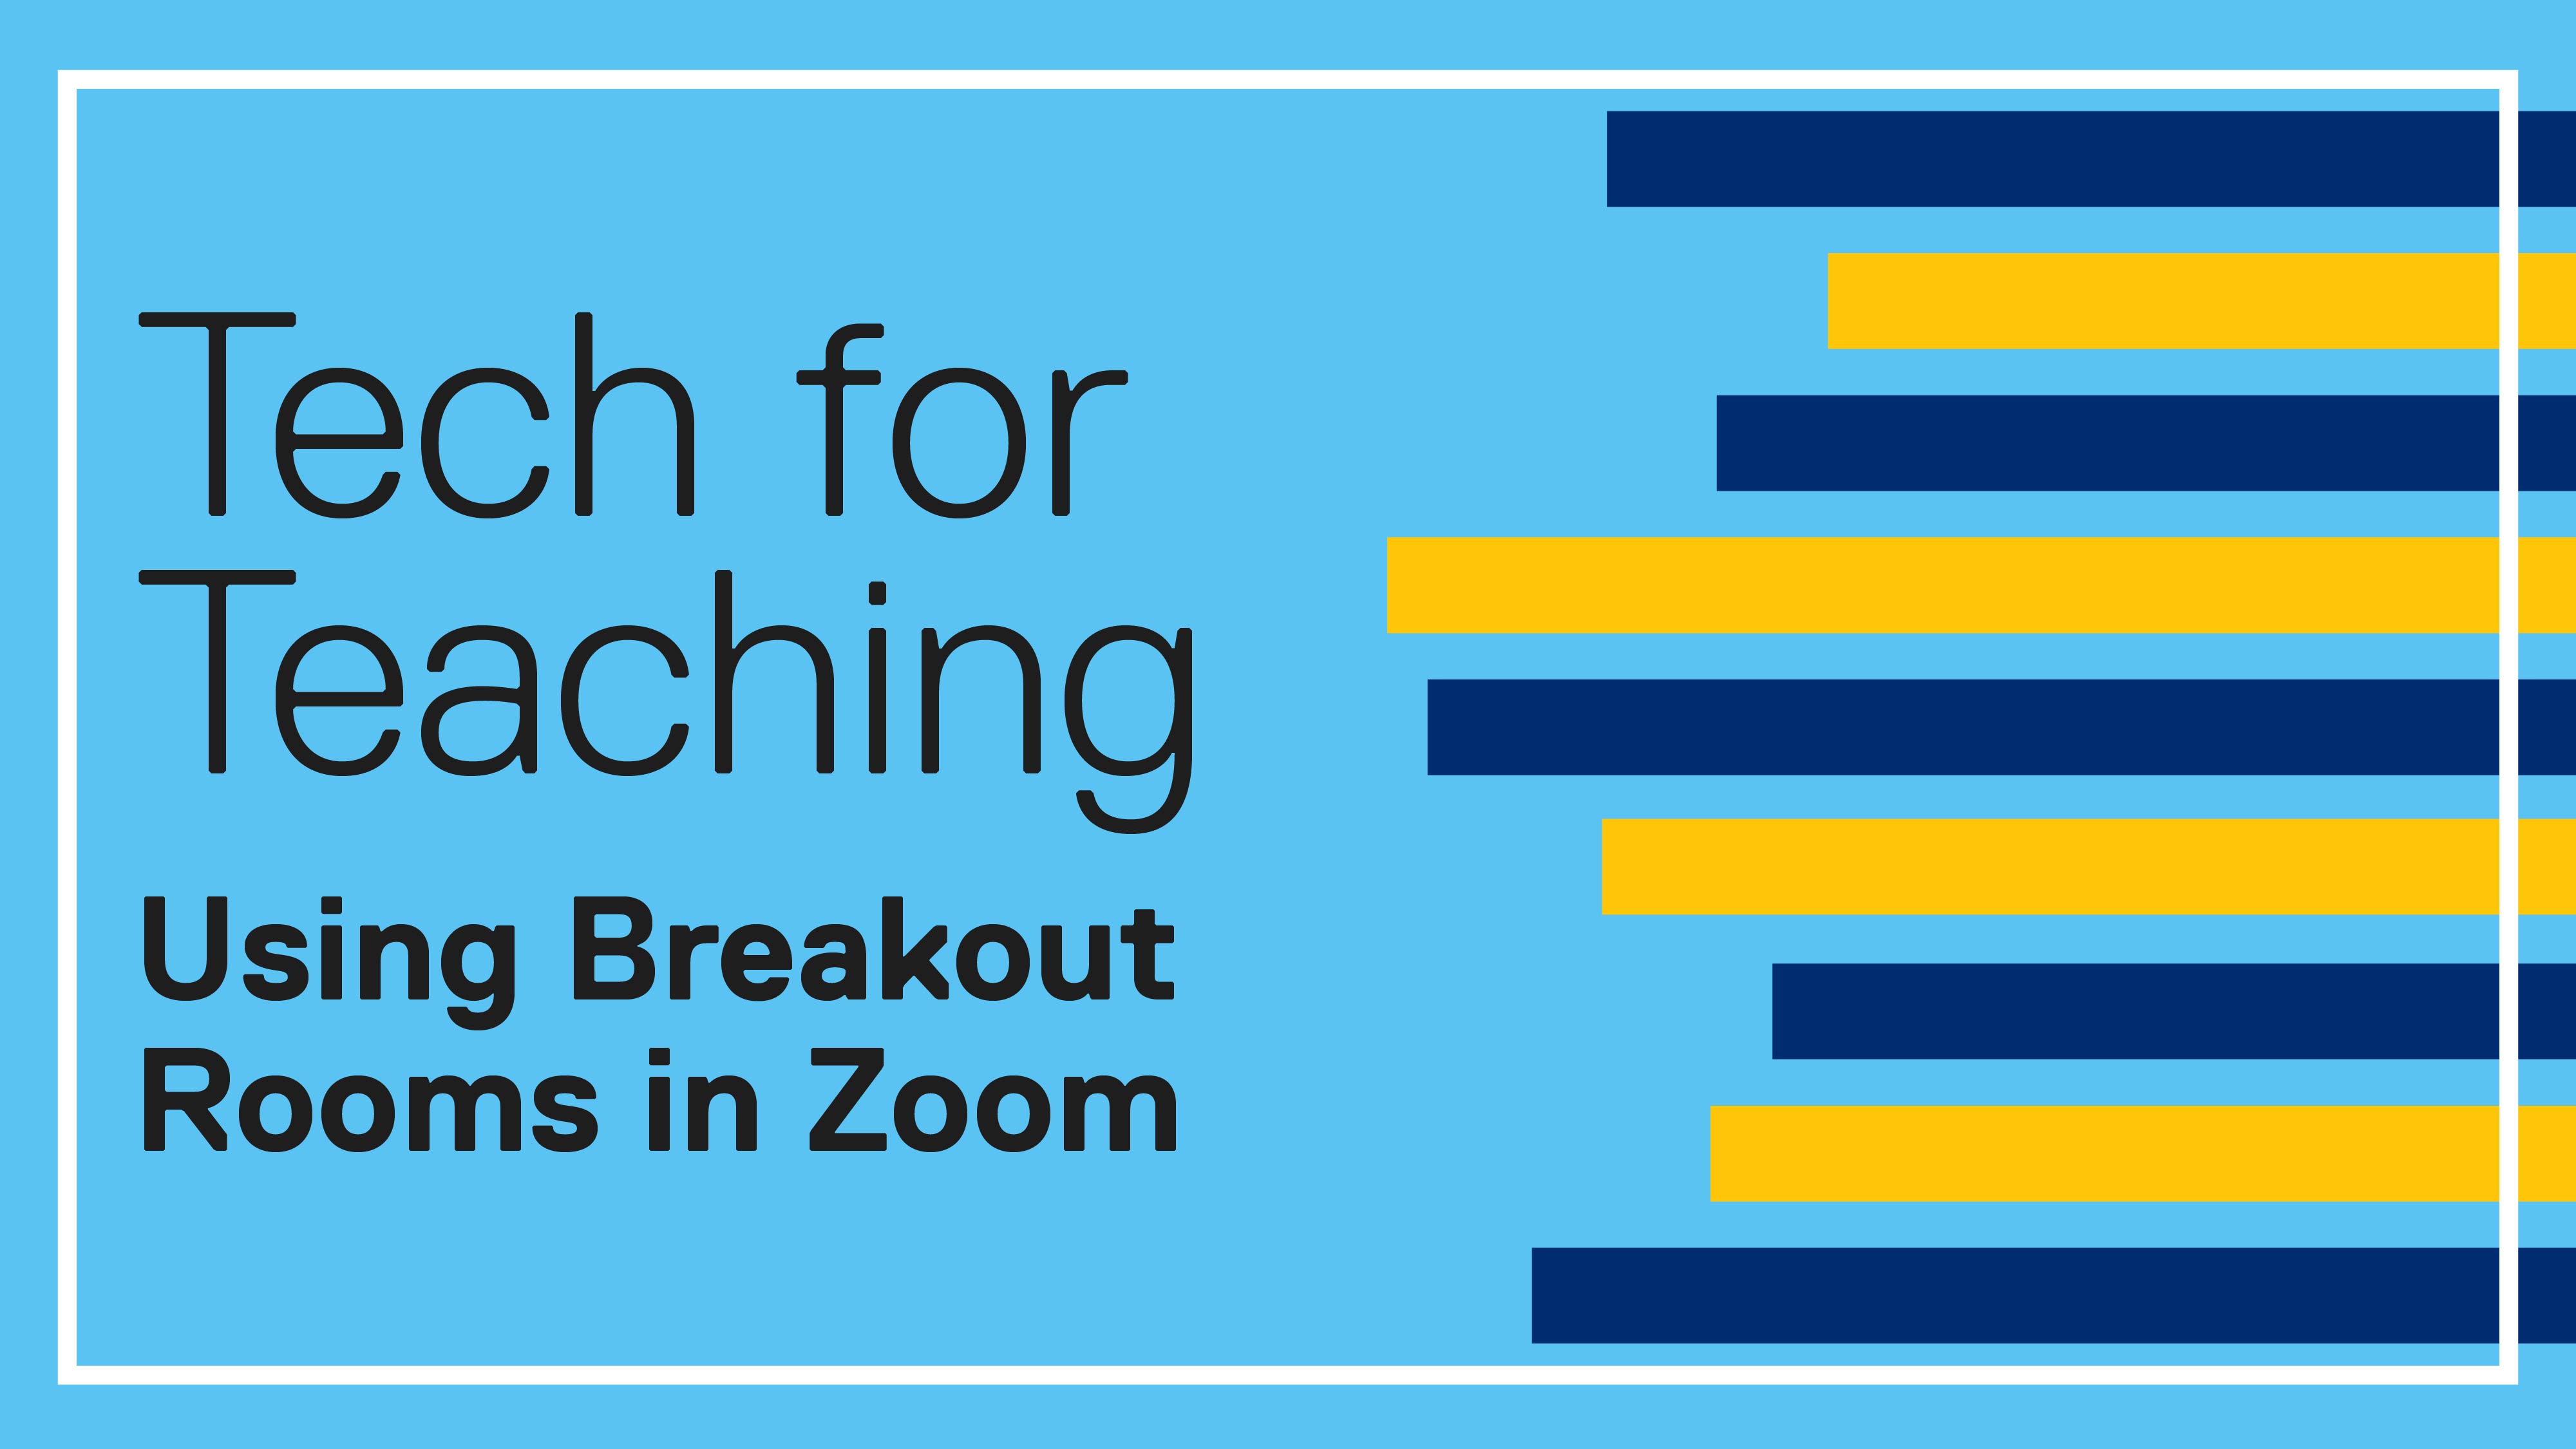 Tech for Teaching. Using Breakout Rooms in Zoom.